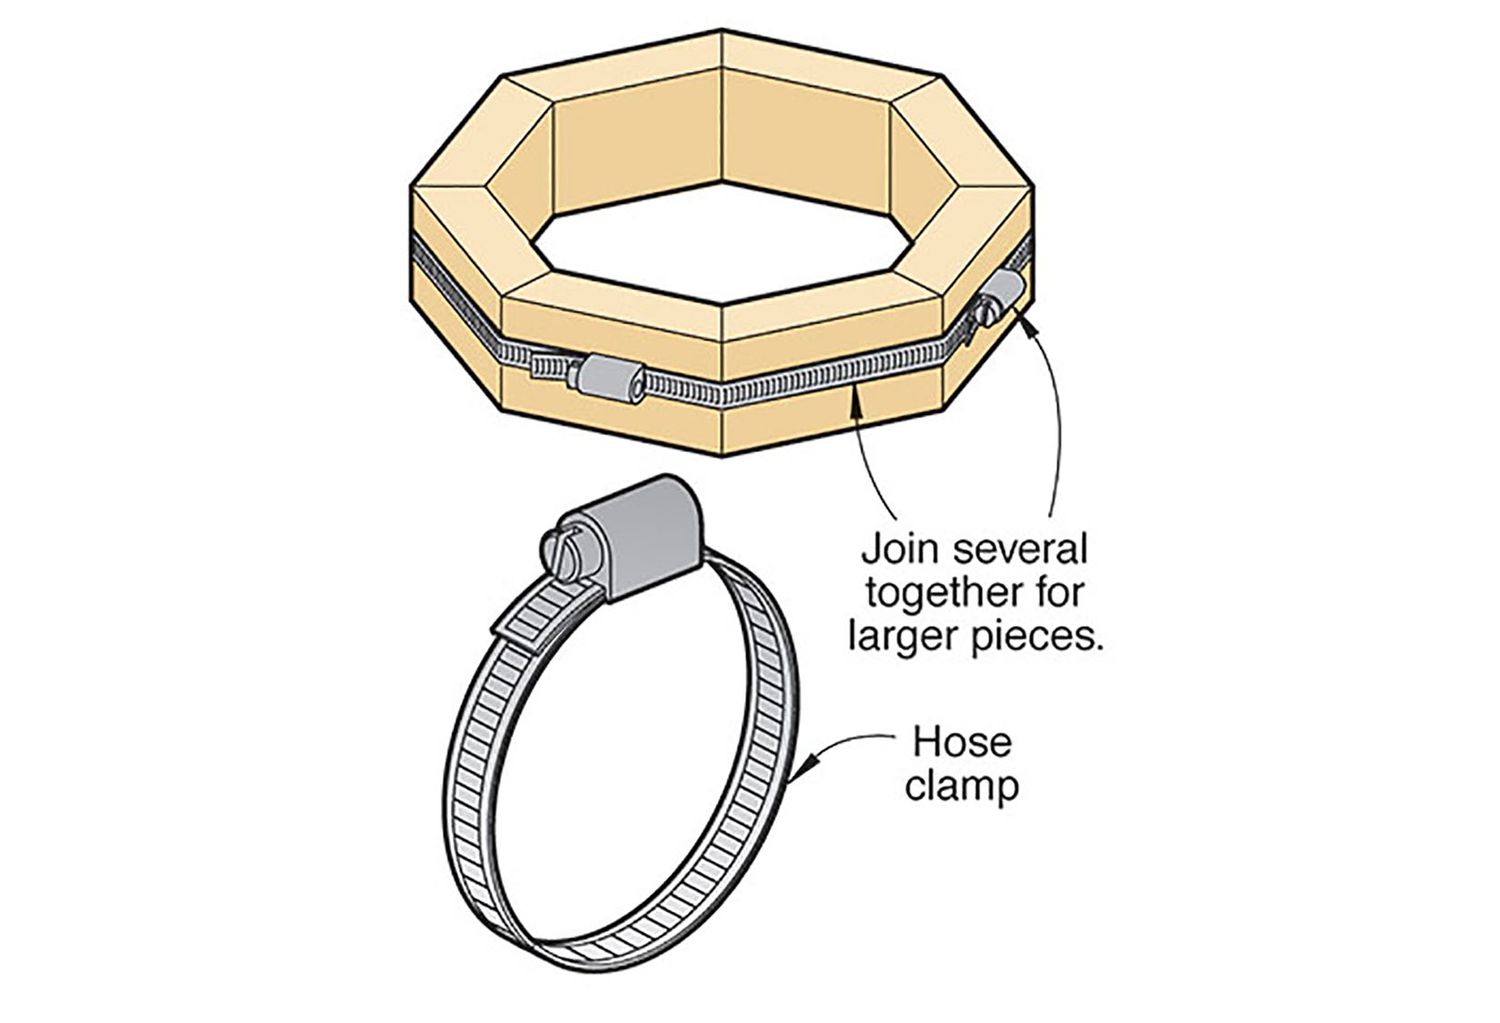 Link your clamps to fit the work